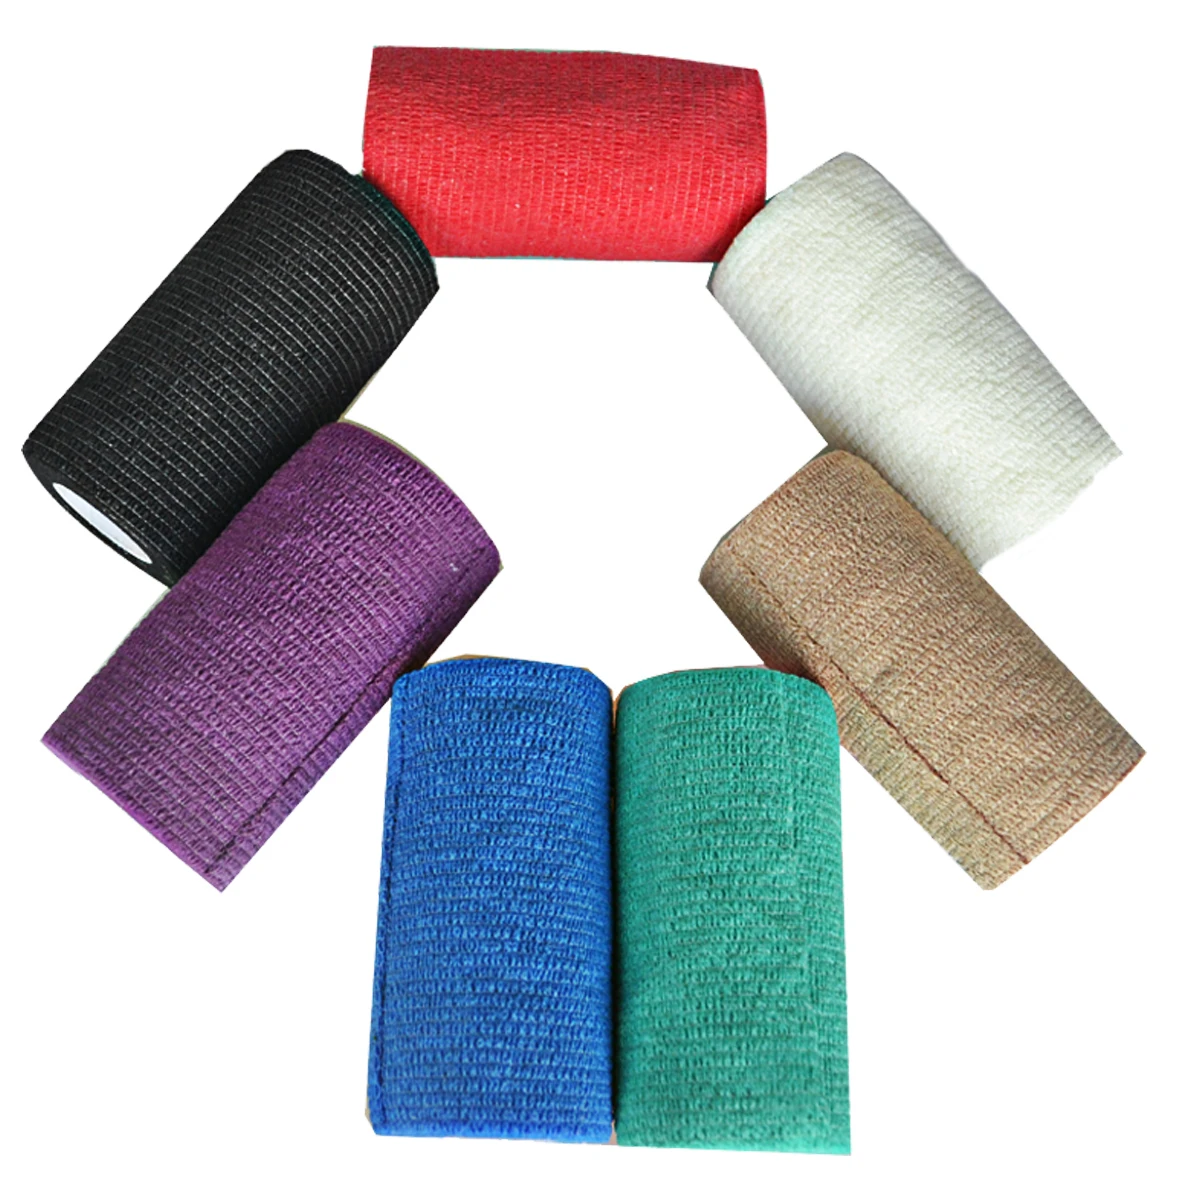 

3Roll/Lot 10cm X 4.5m Self Adhesive Elastic Nonwoven Cohesive Bandage Adherent Wrap Finger Elbow Knee Joint Arm Leg Protect Tape